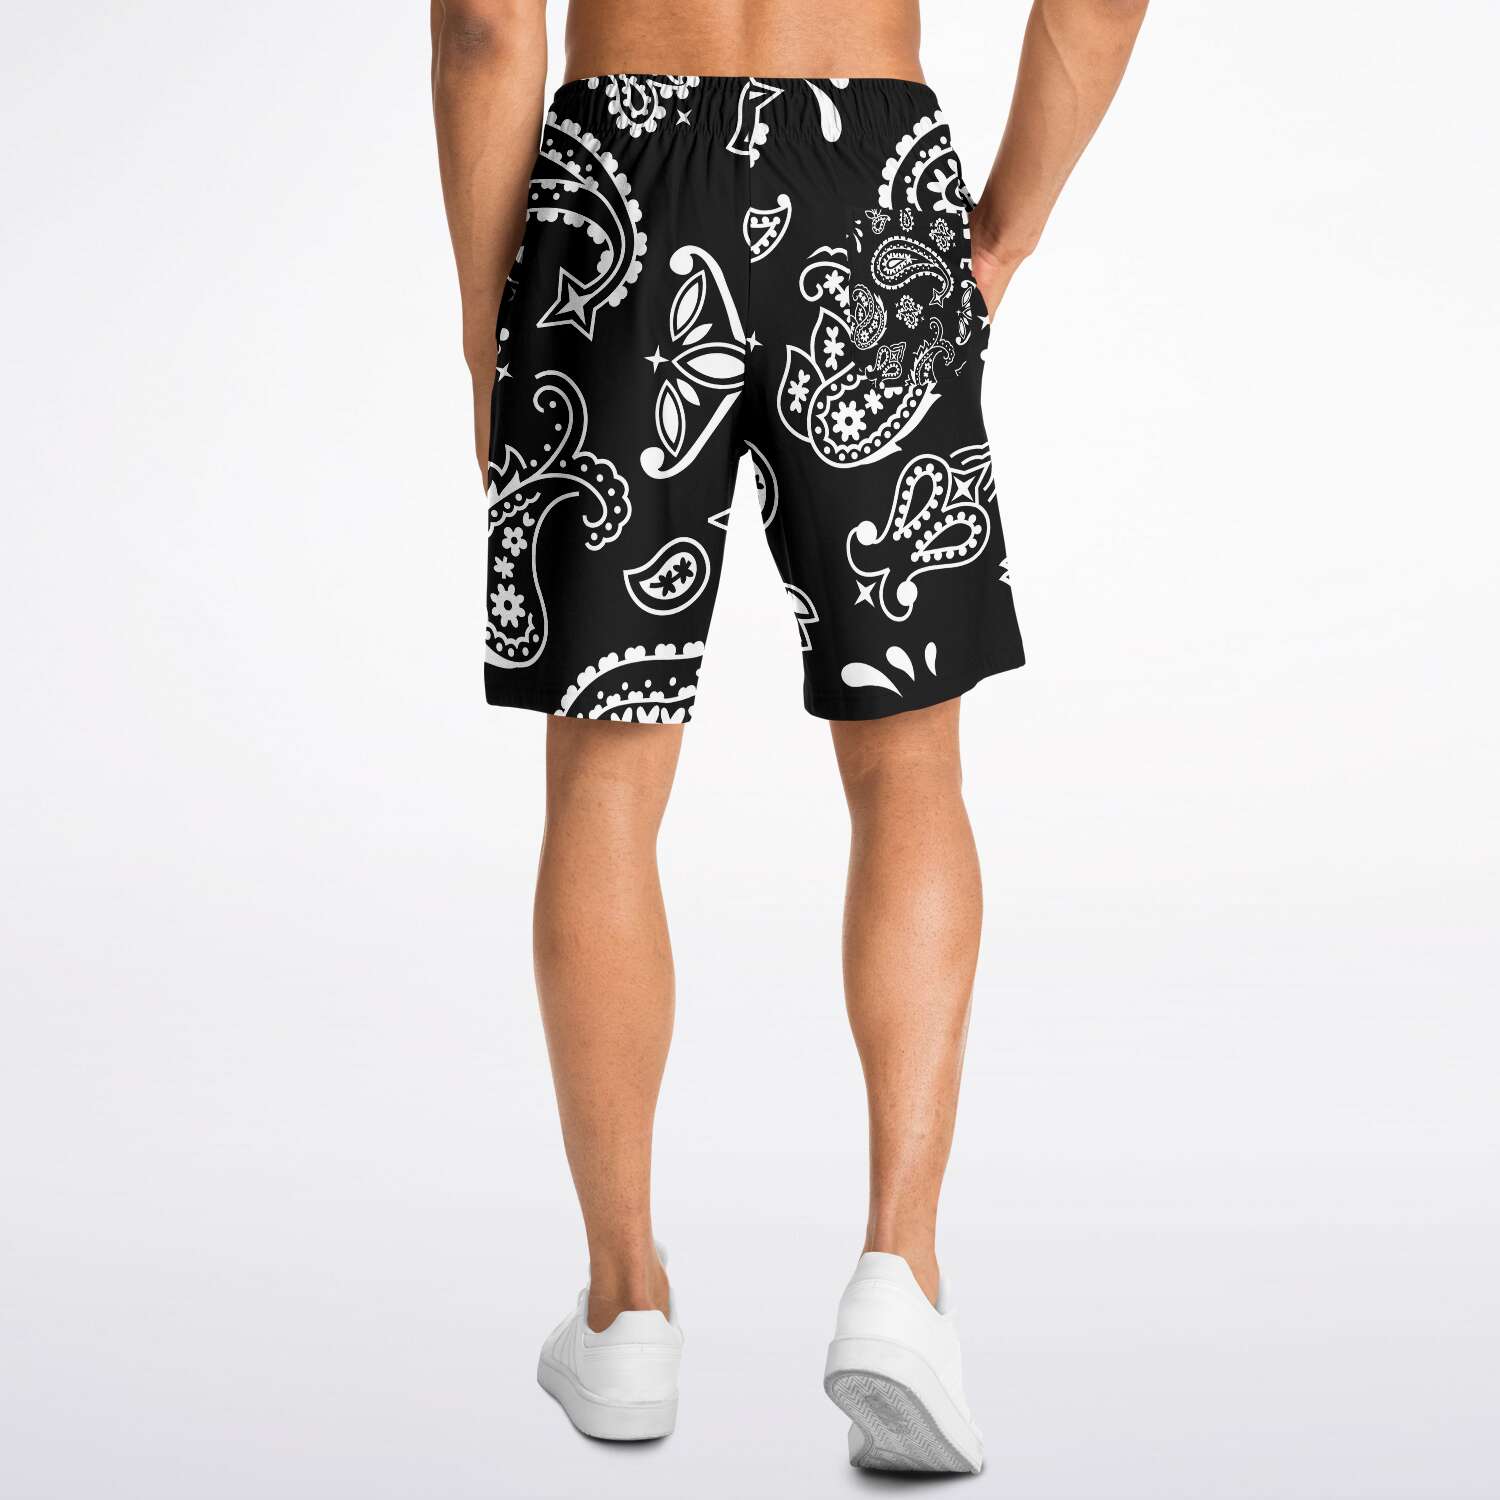 Athletic Shorts with Paisley Print/White Frog Foot Designs, Grey Outline